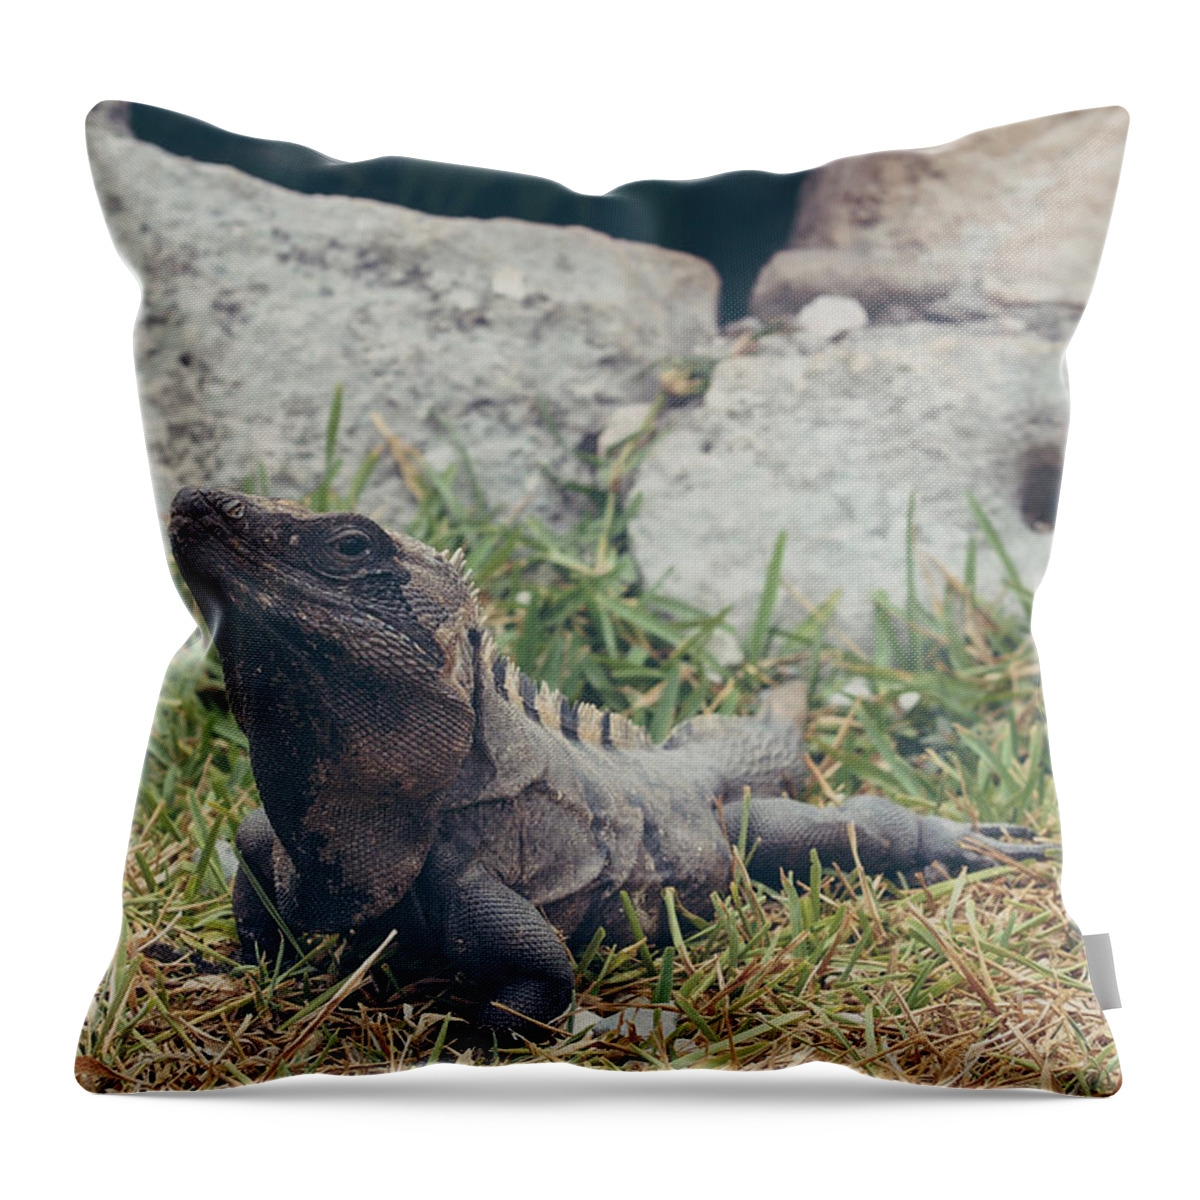 Lizard Throw Pillow featuring the photograph Lizards and More by Alex Leaming